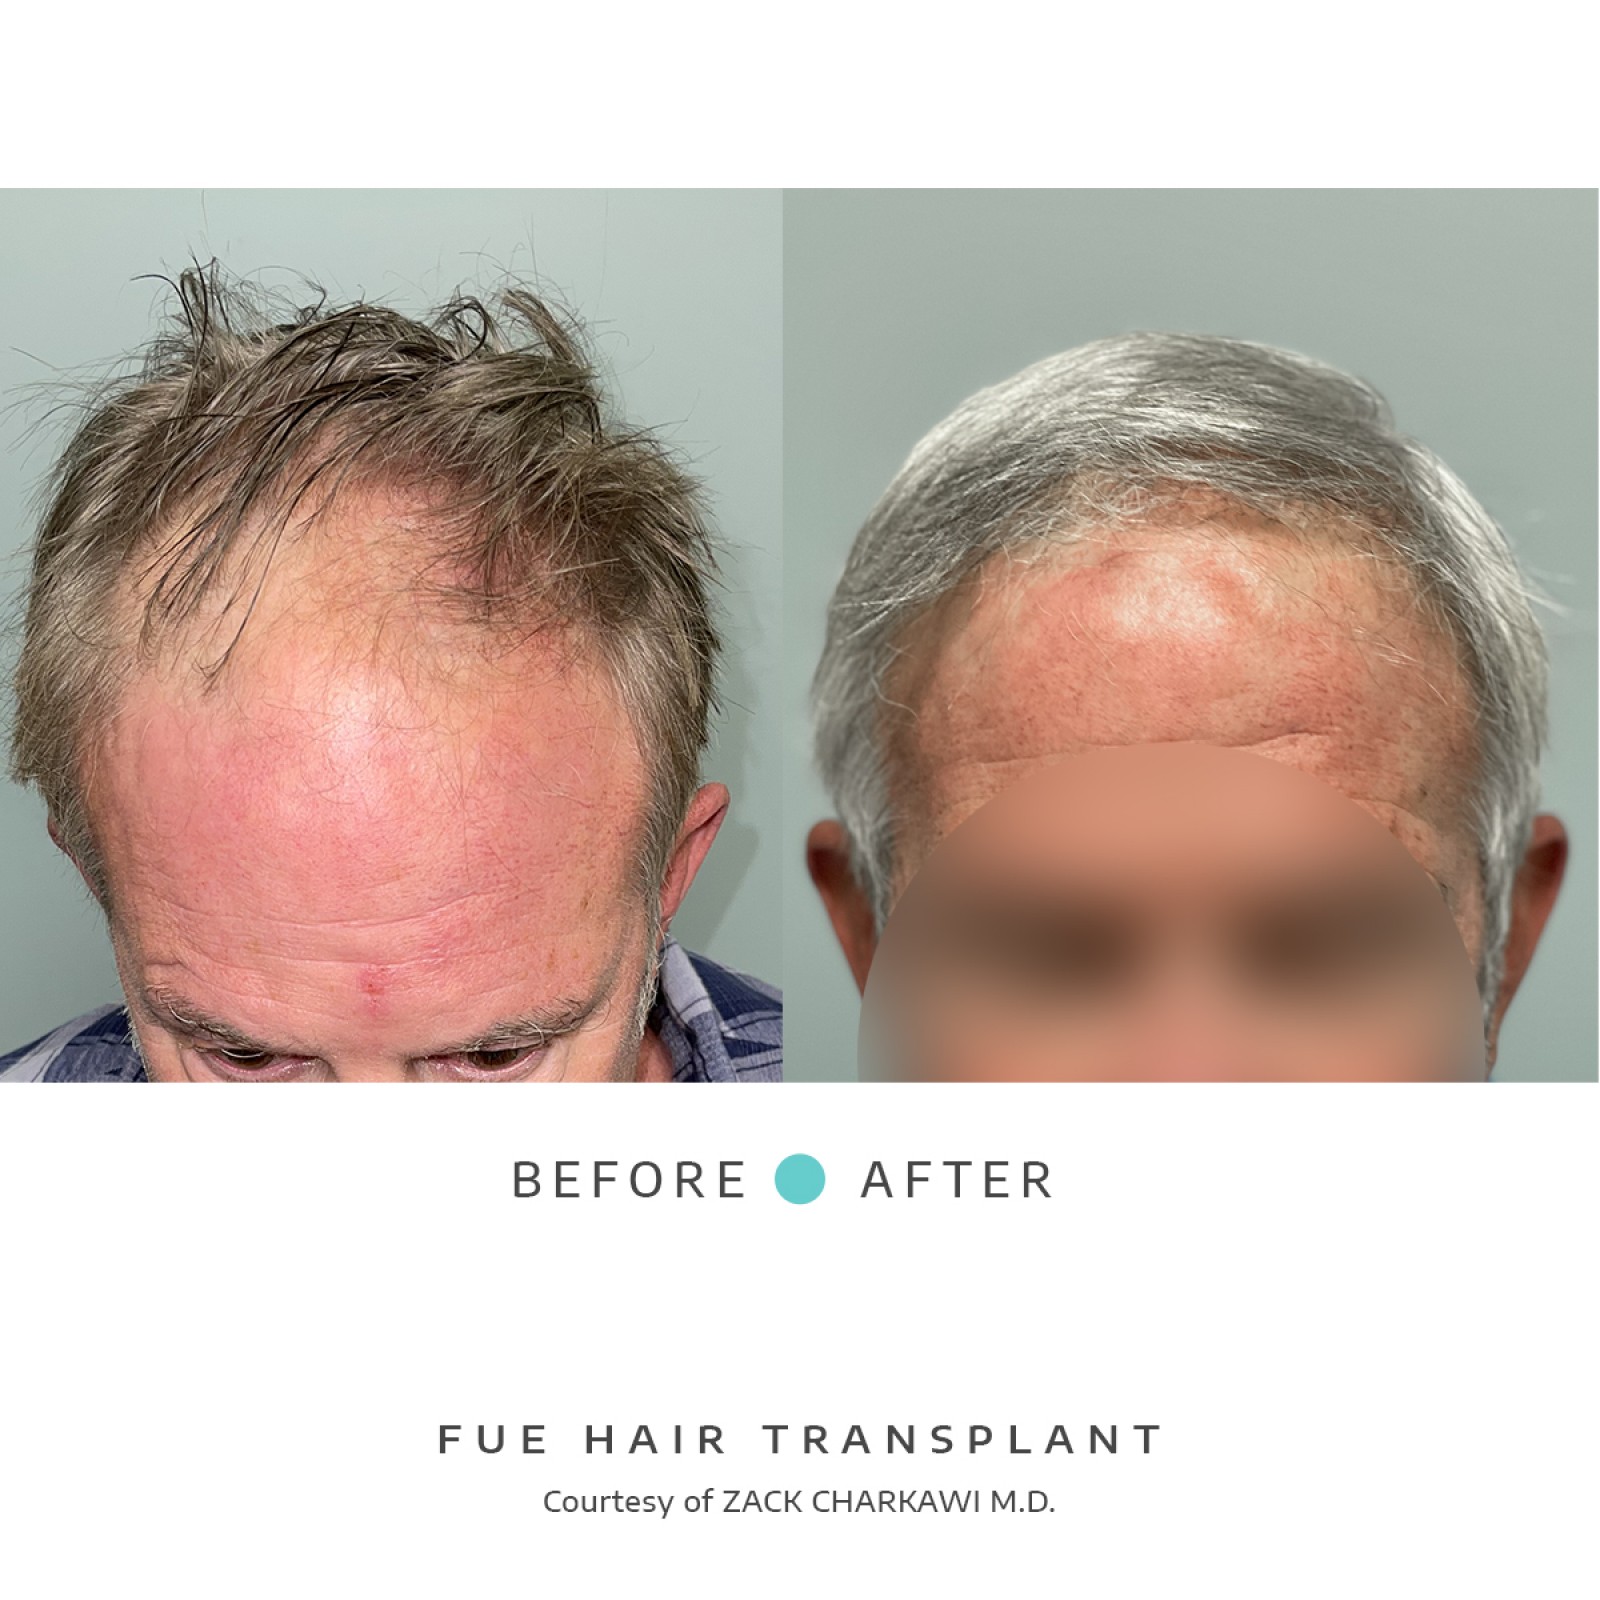 Left image  reveals significant balding and thinning hair on a man's head, . Conversely, the right image highlights the dramatic outcome of a successful hair transplant procedure. 